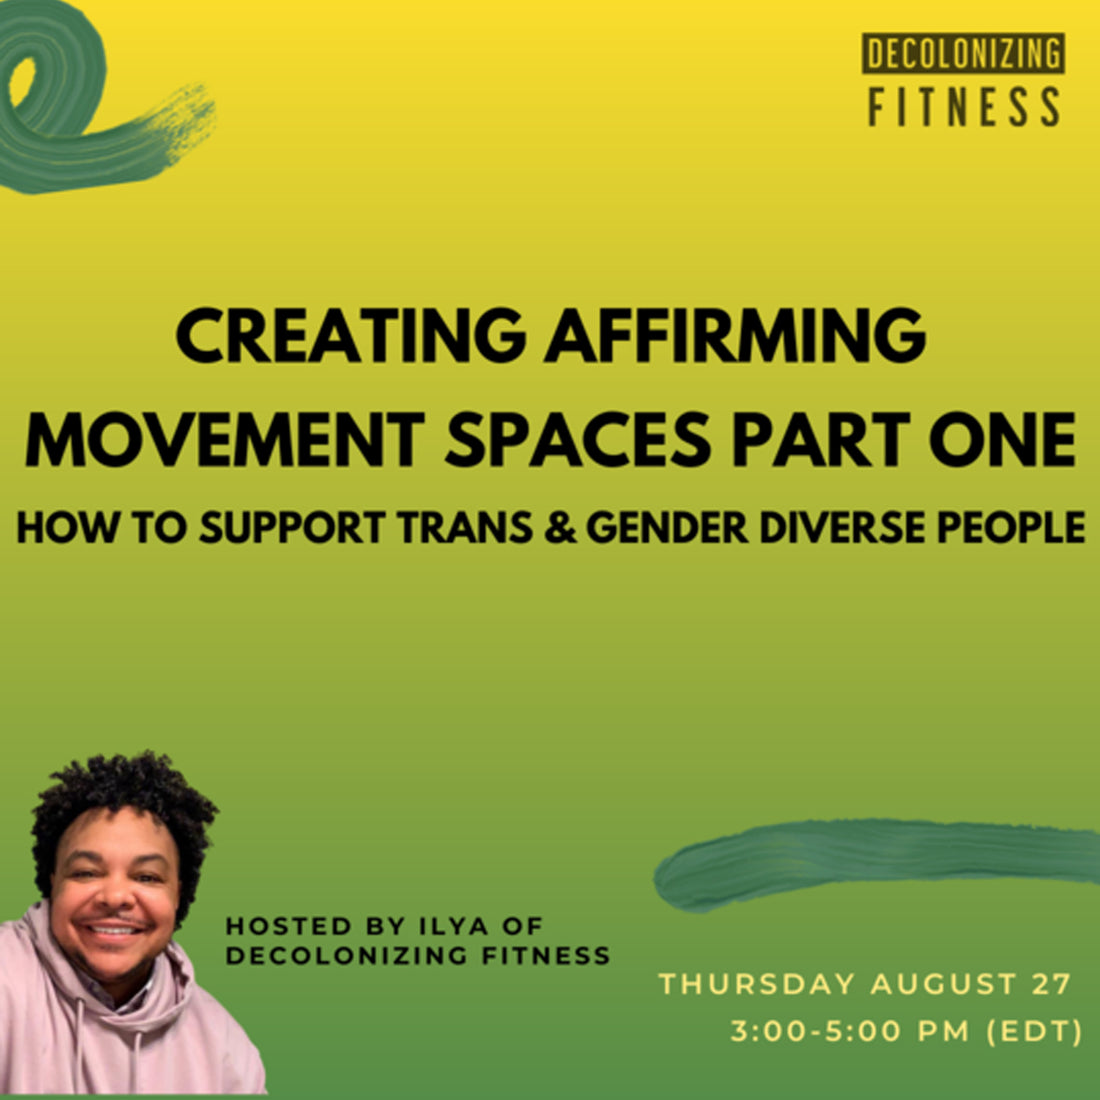 Creating Affirming Movement Spaces Part One: How to Support Trans and Gender Diverse People, by Ilya Parker, Decolonizing Fitness